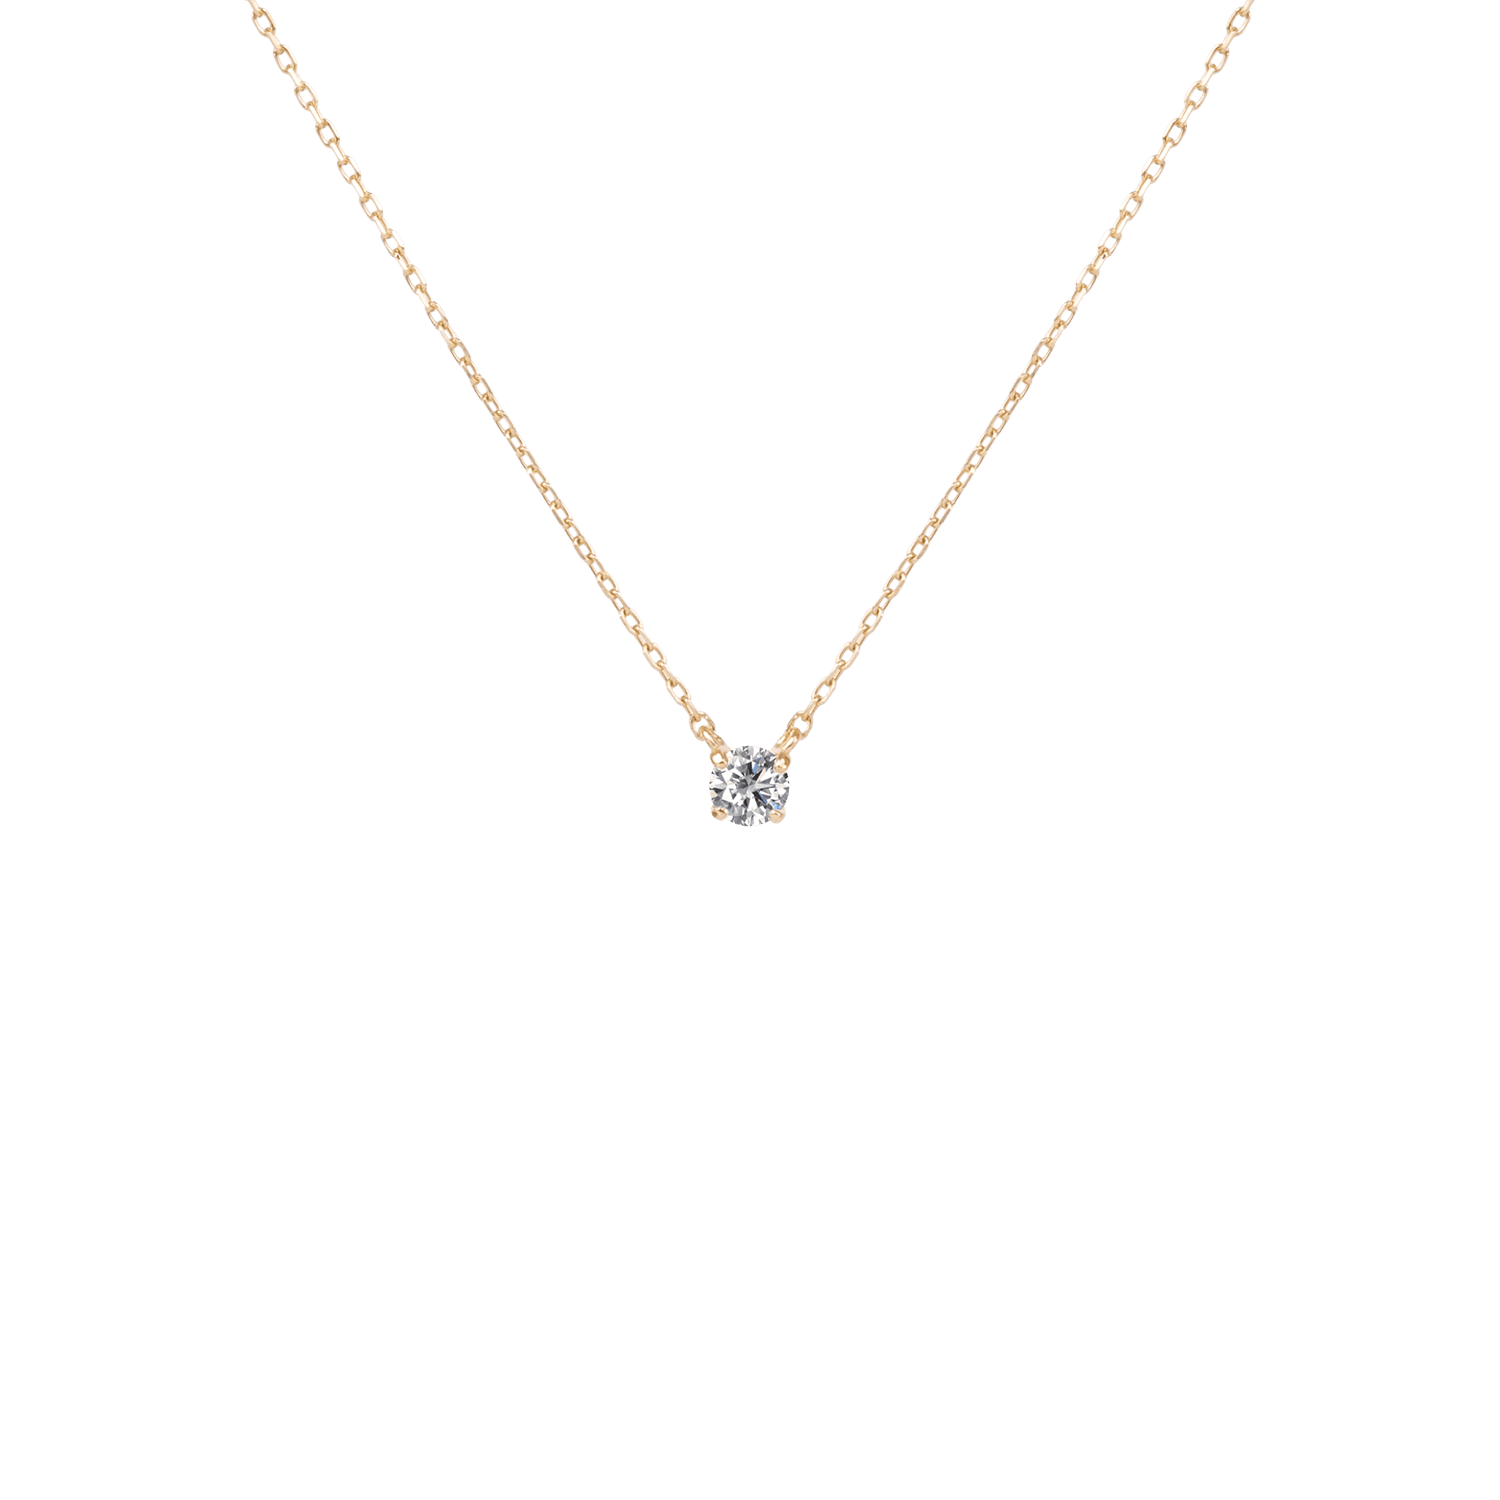 Solitaire Lab-Grown Diamond Necklace | 18K yellow gold / Chain length 420 mm / 0.1 ct  | Jewelry | The Future Rocks